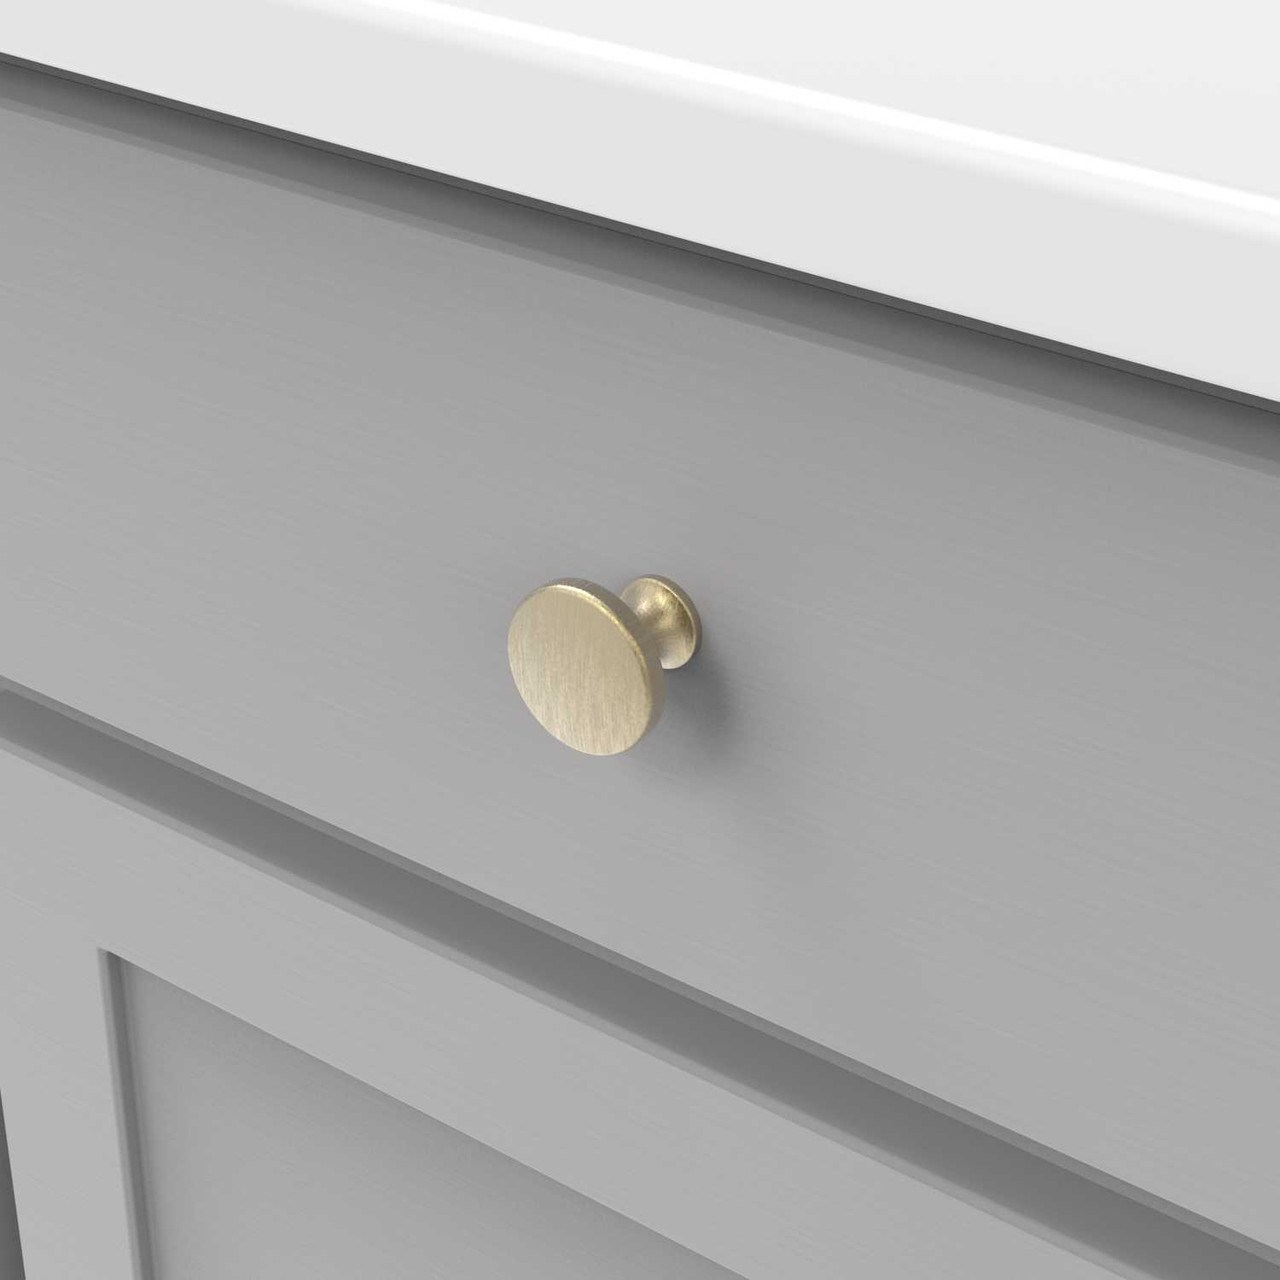 Hickory Forge Champagne Bronze Cabinet Knob at The Knob Shop